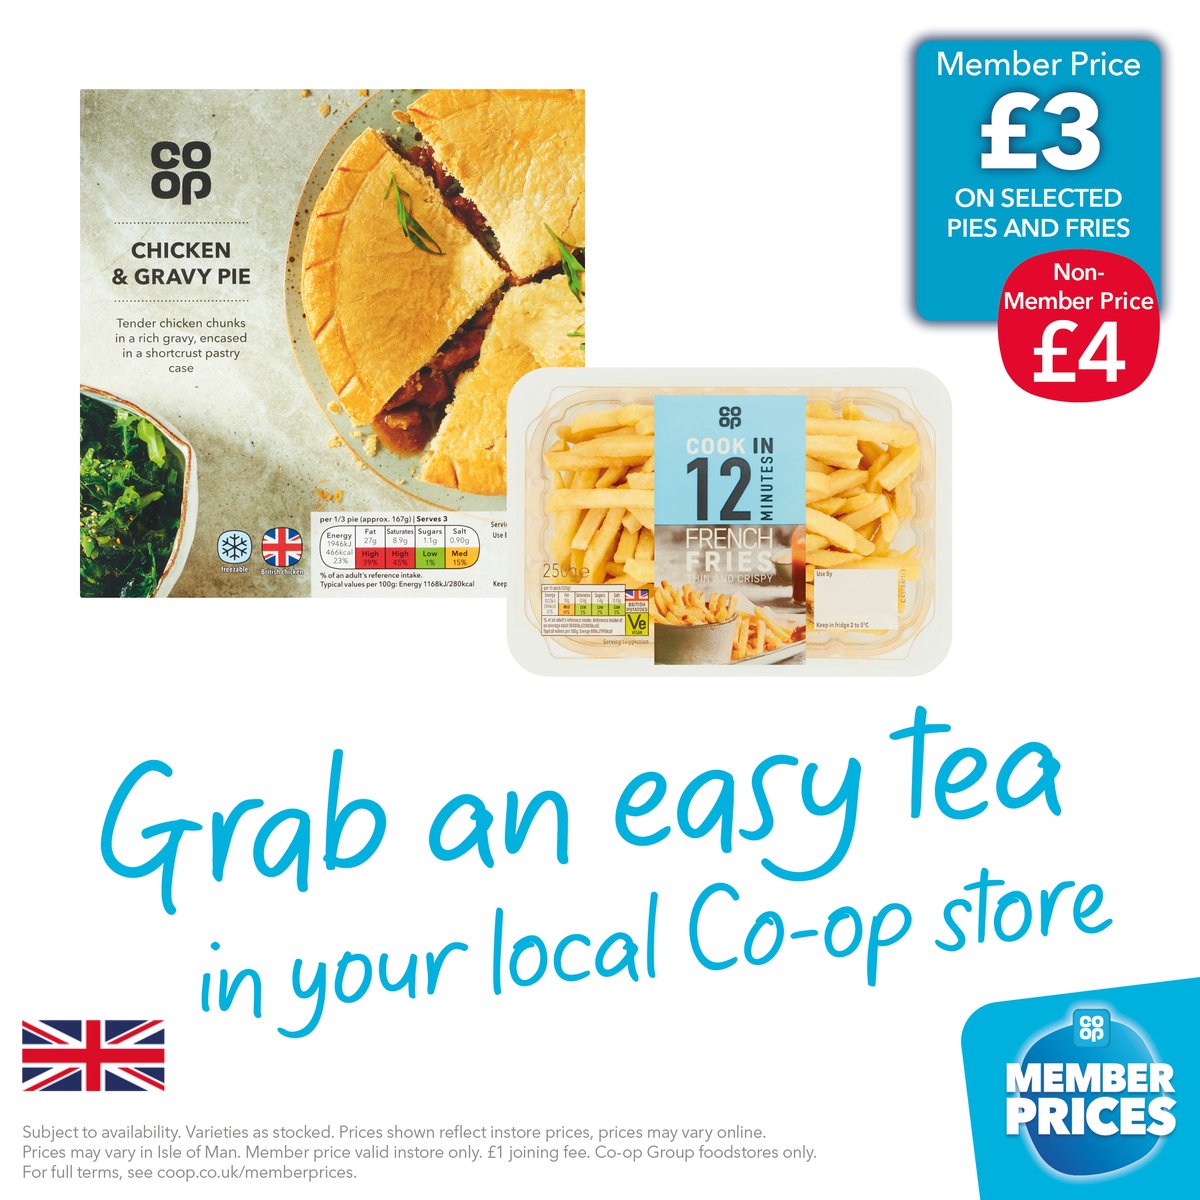 Looking for an easy tea? Co-op Members can get pie and fries for just £3 🙌 🥧 Pop to your local @coopuk store. Not yet a Co-op Member? Sign up today 👉 coop.co.uk/Membership